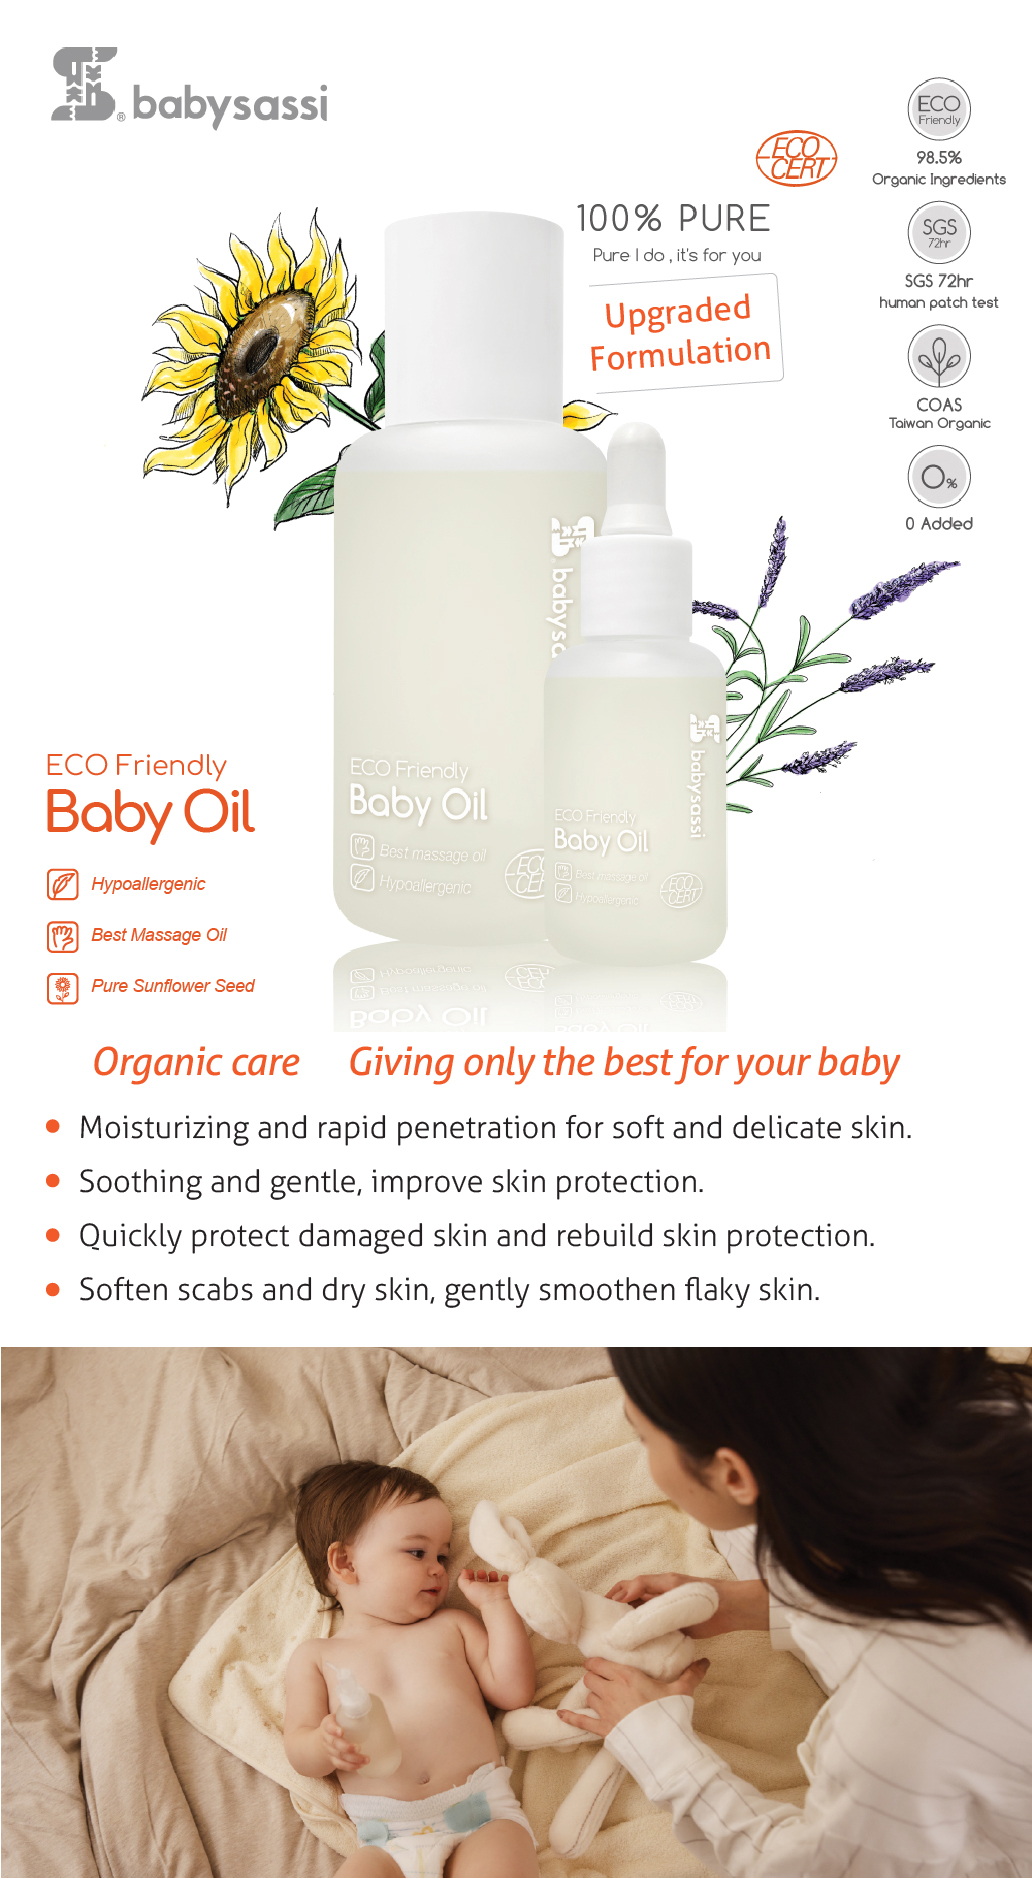 ERH-Web-baby-Oil-(-ENG-only-)-001